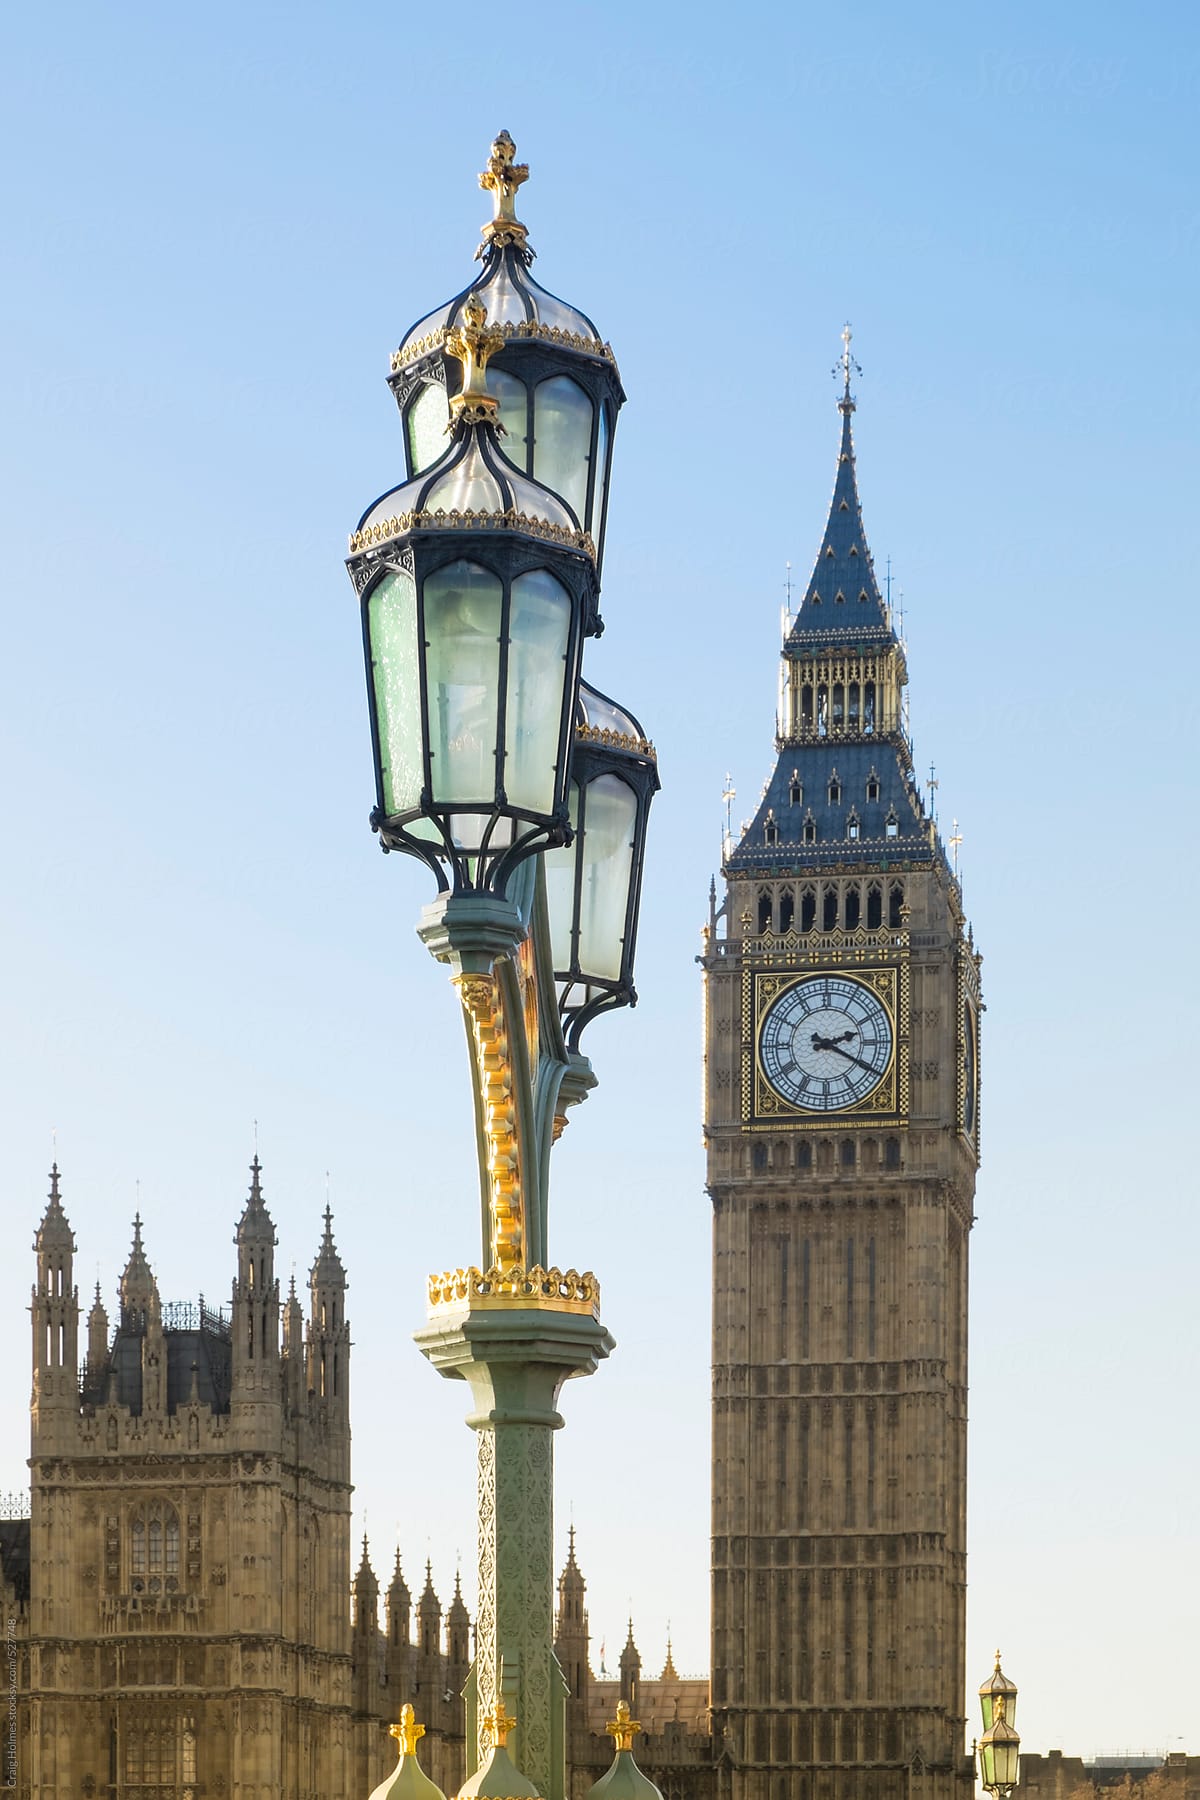 The Palace of Westminster and Big Ben clock tower, London